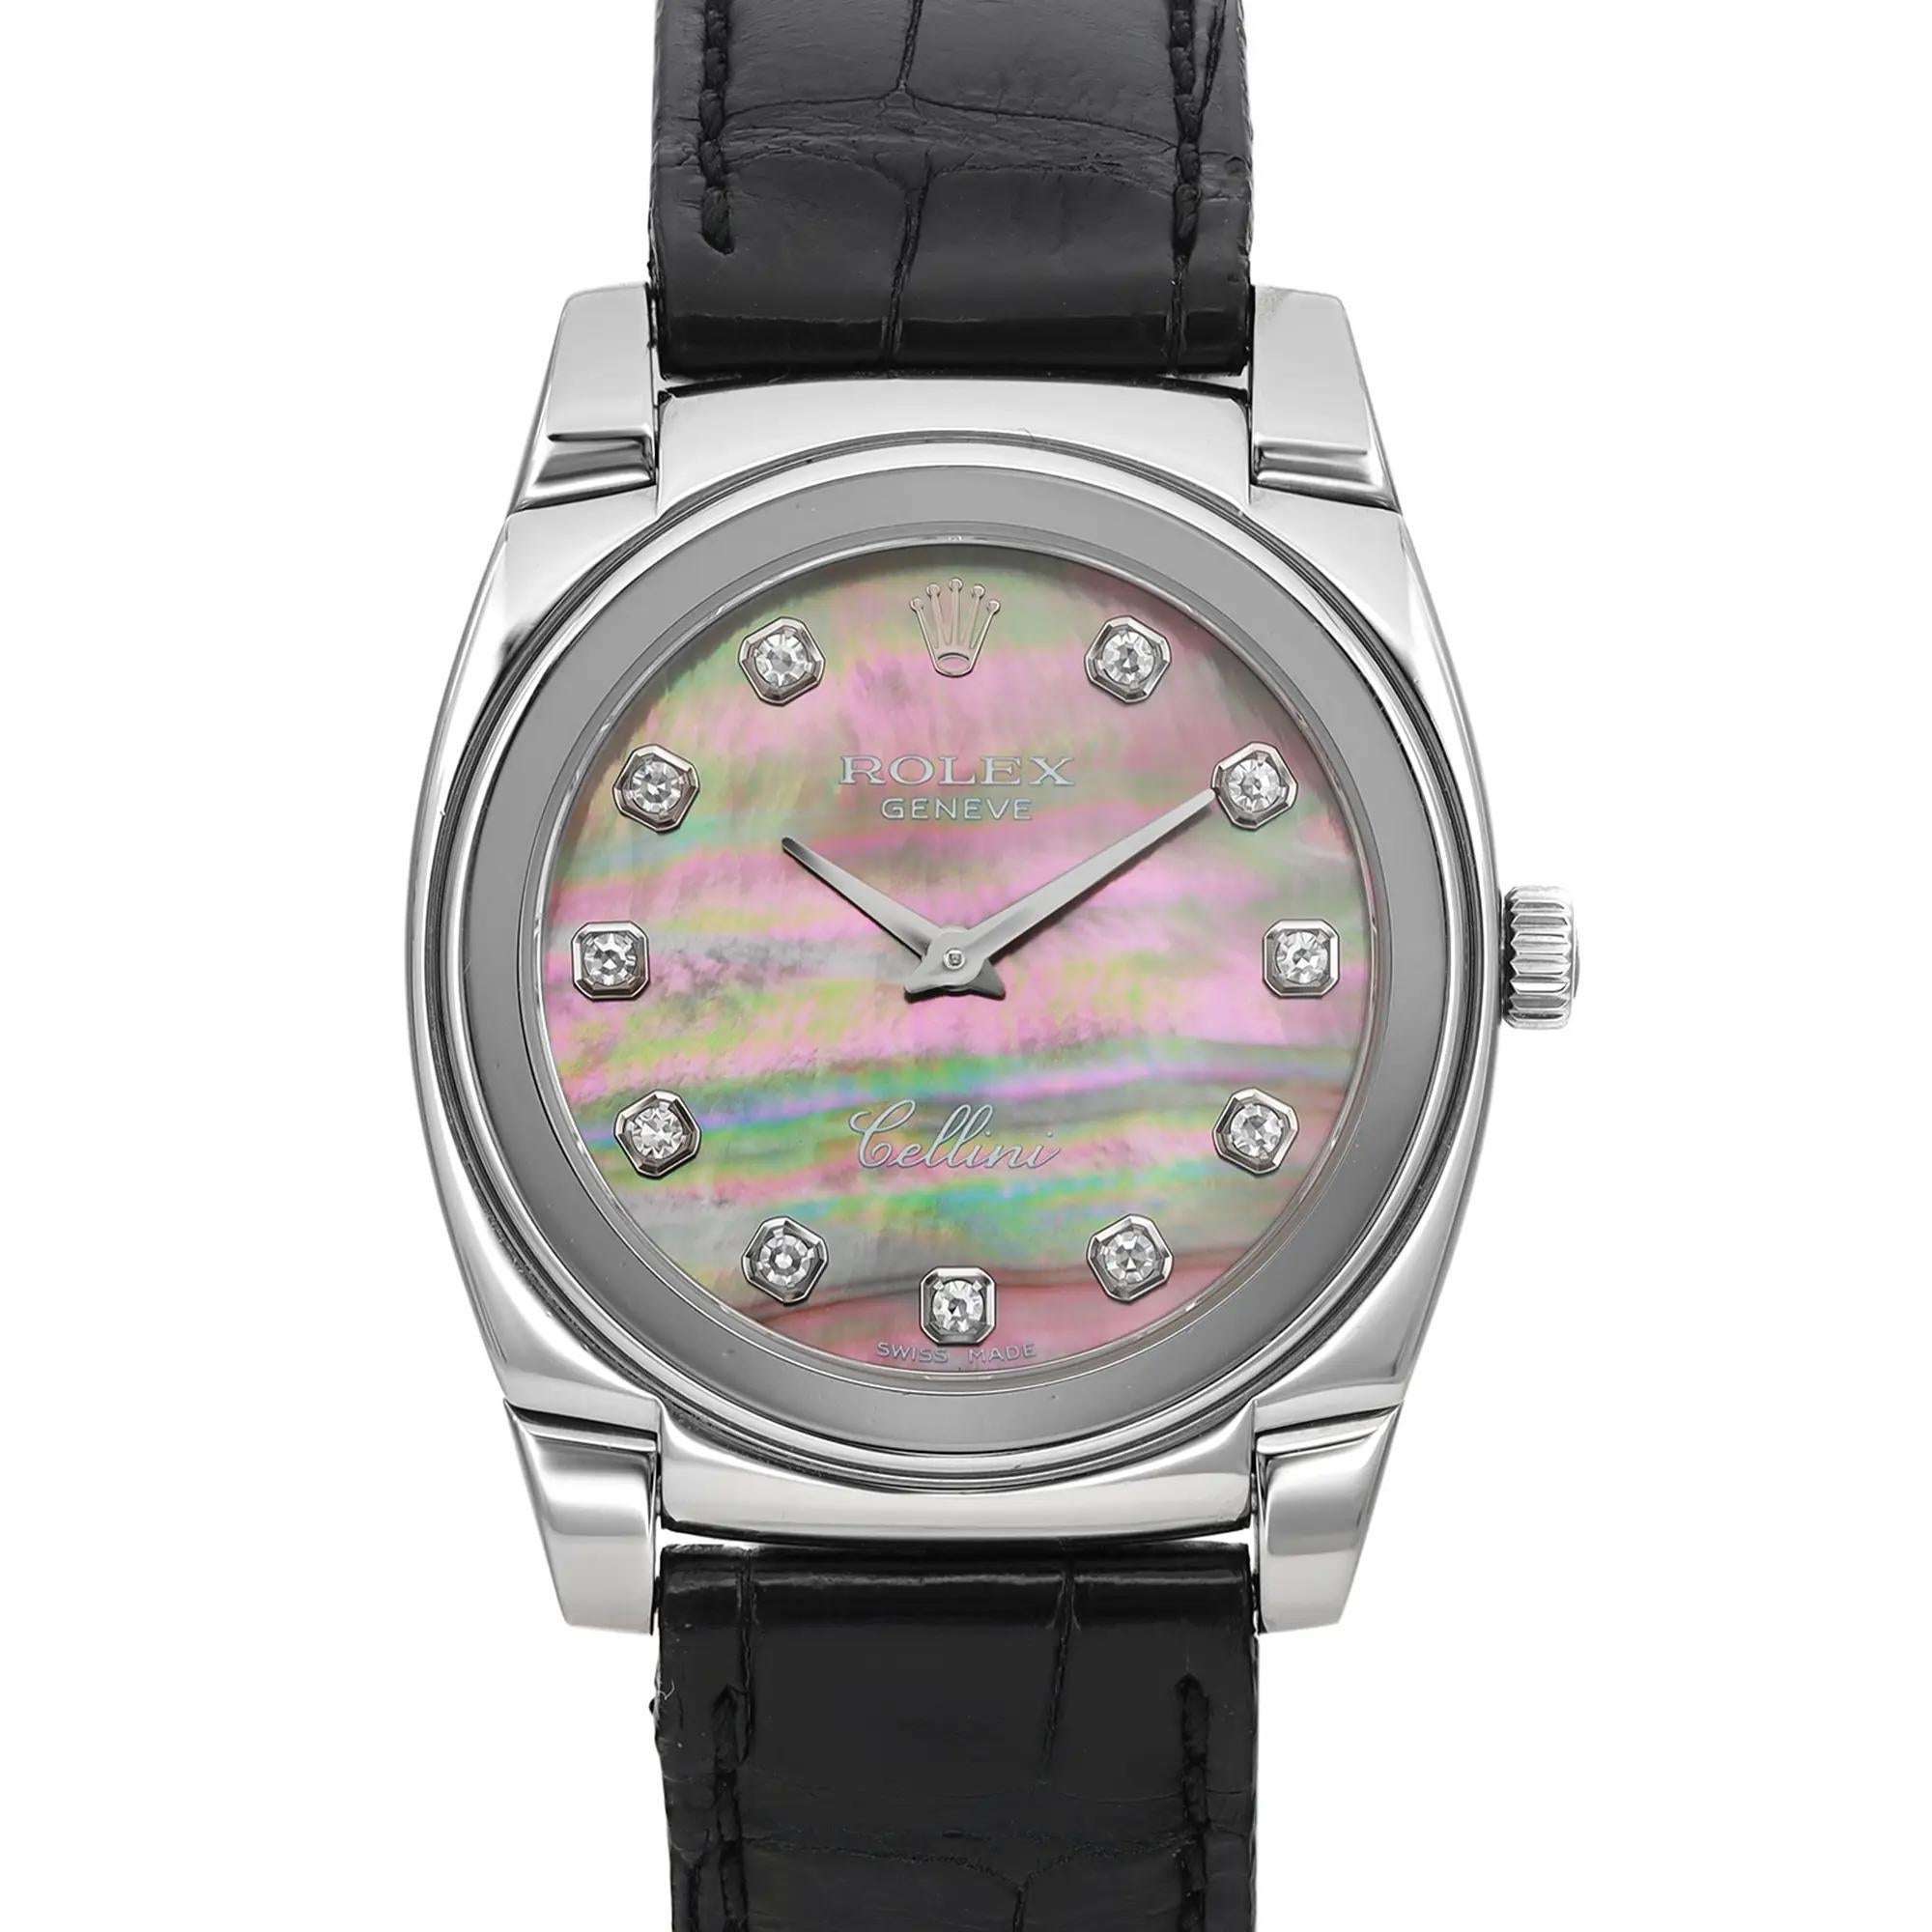 Pre-owned. The watch was manufactured in 1999 The band shows heavy signs of wear. 


Brand: Rolex
Model: Rolex Cellini Cestello
Model Number: 5320
Type: Wristwatch
Department: Unisex Adult
Vintage: Yes (Year Manufactured: 1990-1999)
Movement: